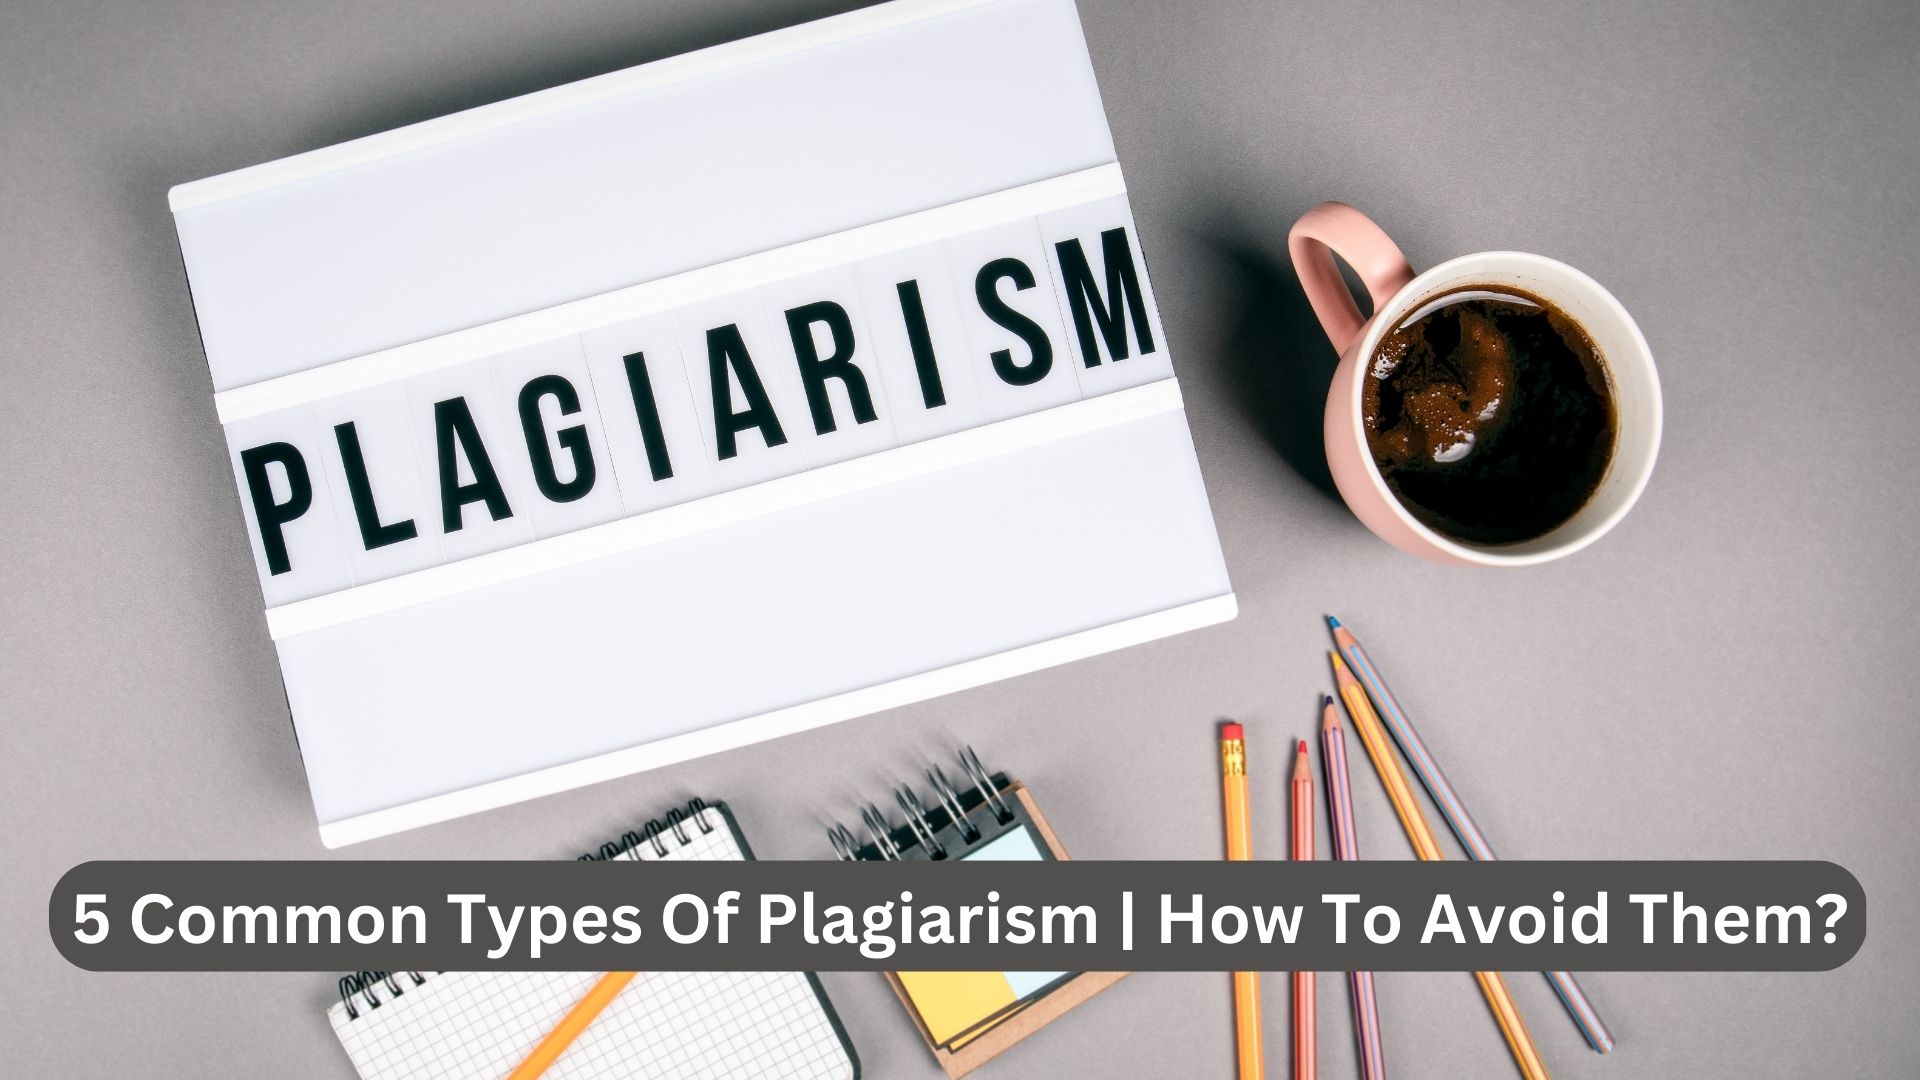 5 Plagiarism Types and How to Avoid Them with a Paraphrasing Tool